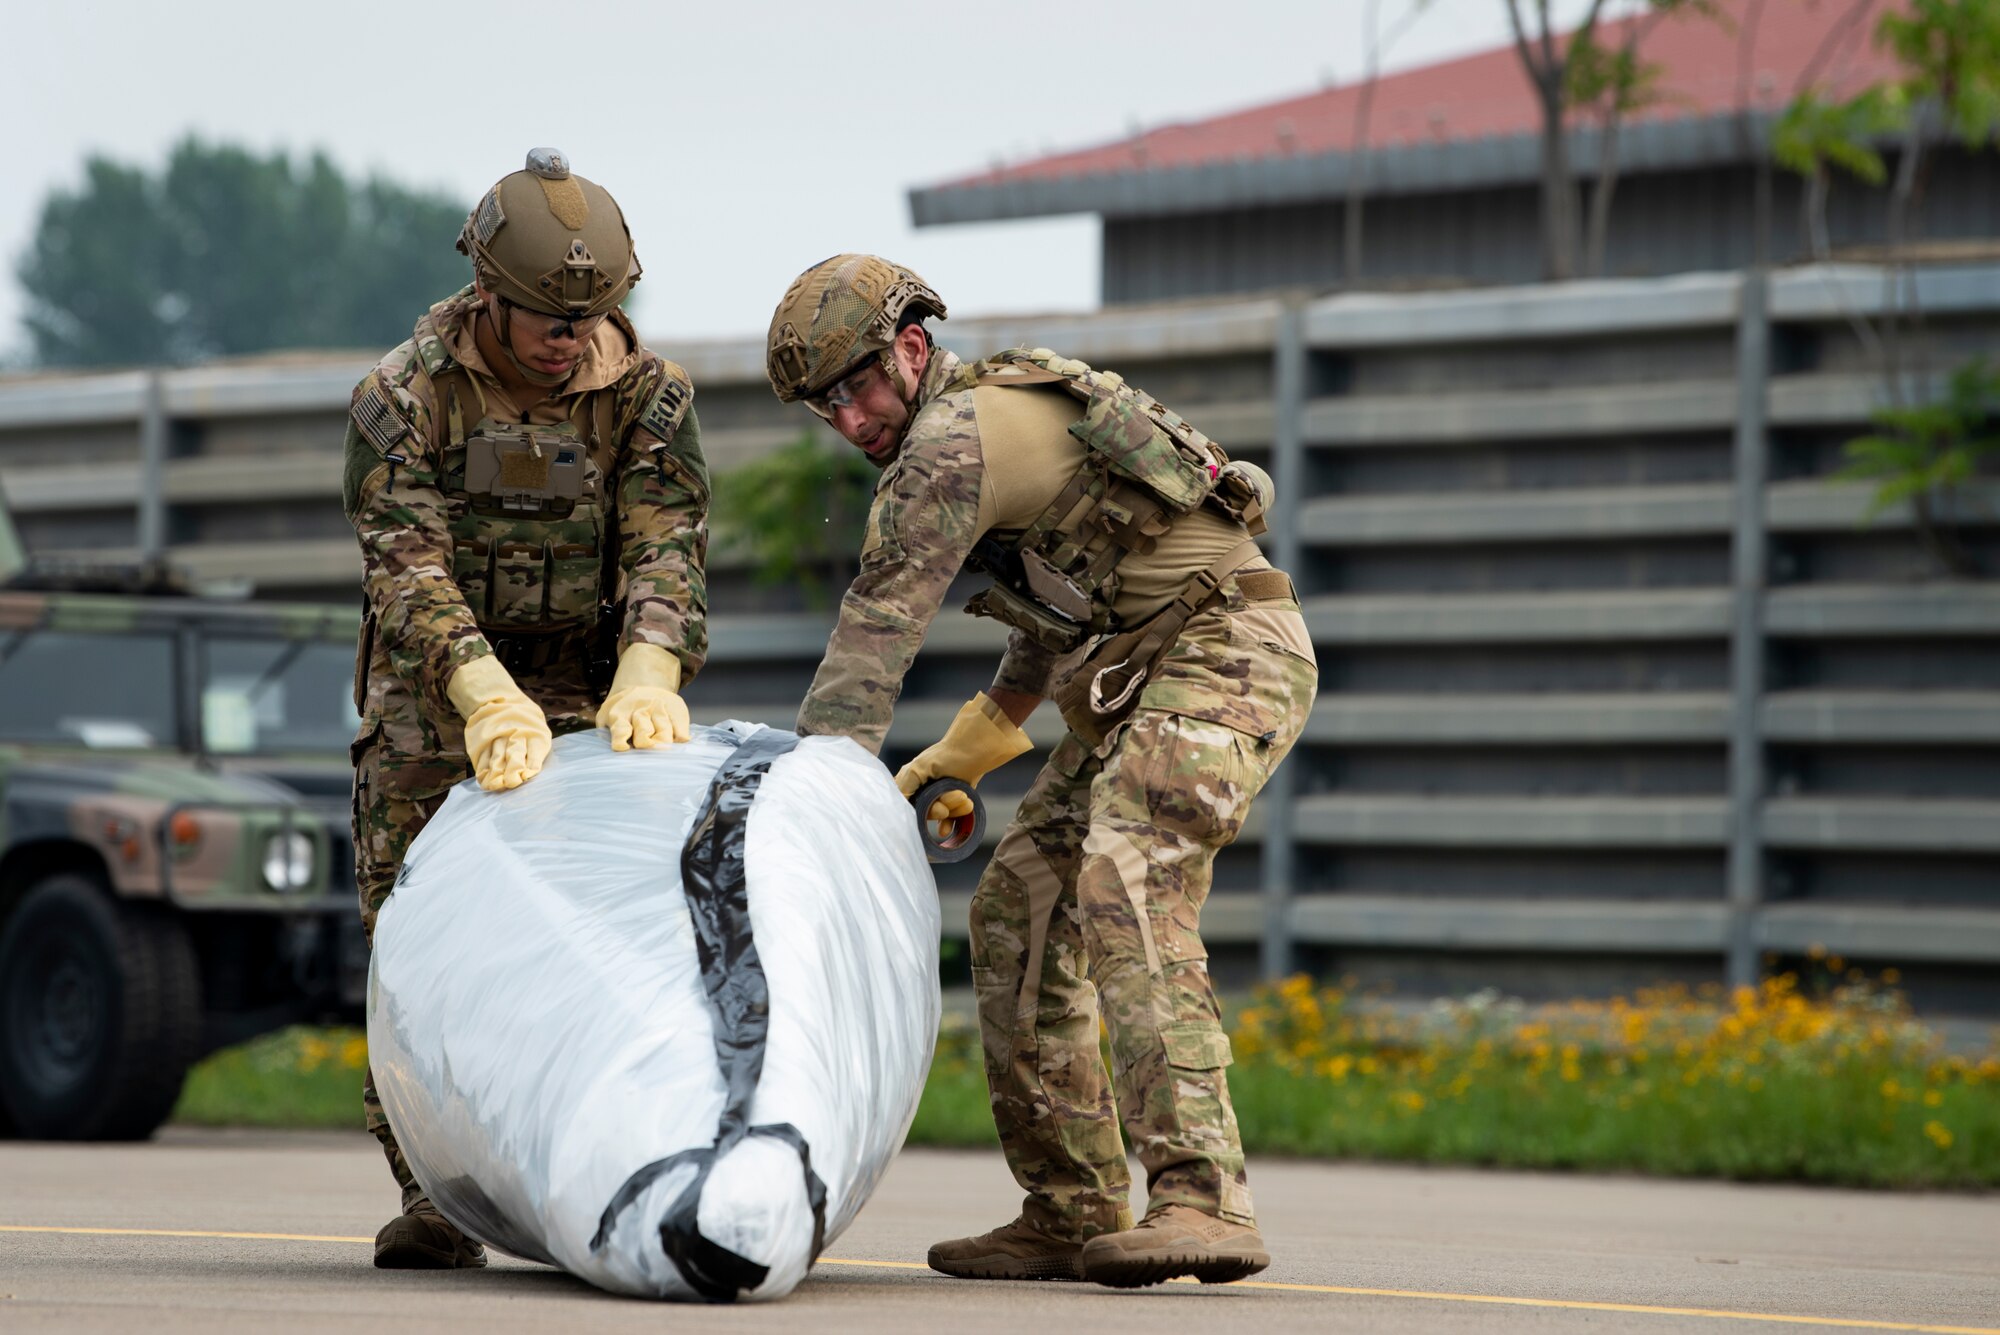 U.S. Air Force Senior Airman Joshua Young and Staff Sgt. Michael Augustus, 35th Civil Engineer Squadron, Explosive Ordnance Disposal (EOD) technicians from Misawa Air Base, Japan, practice covering a mock chemical weapon during a bilateral training event at Suwon Air Base, Republic of Korea, July 6, 2022.